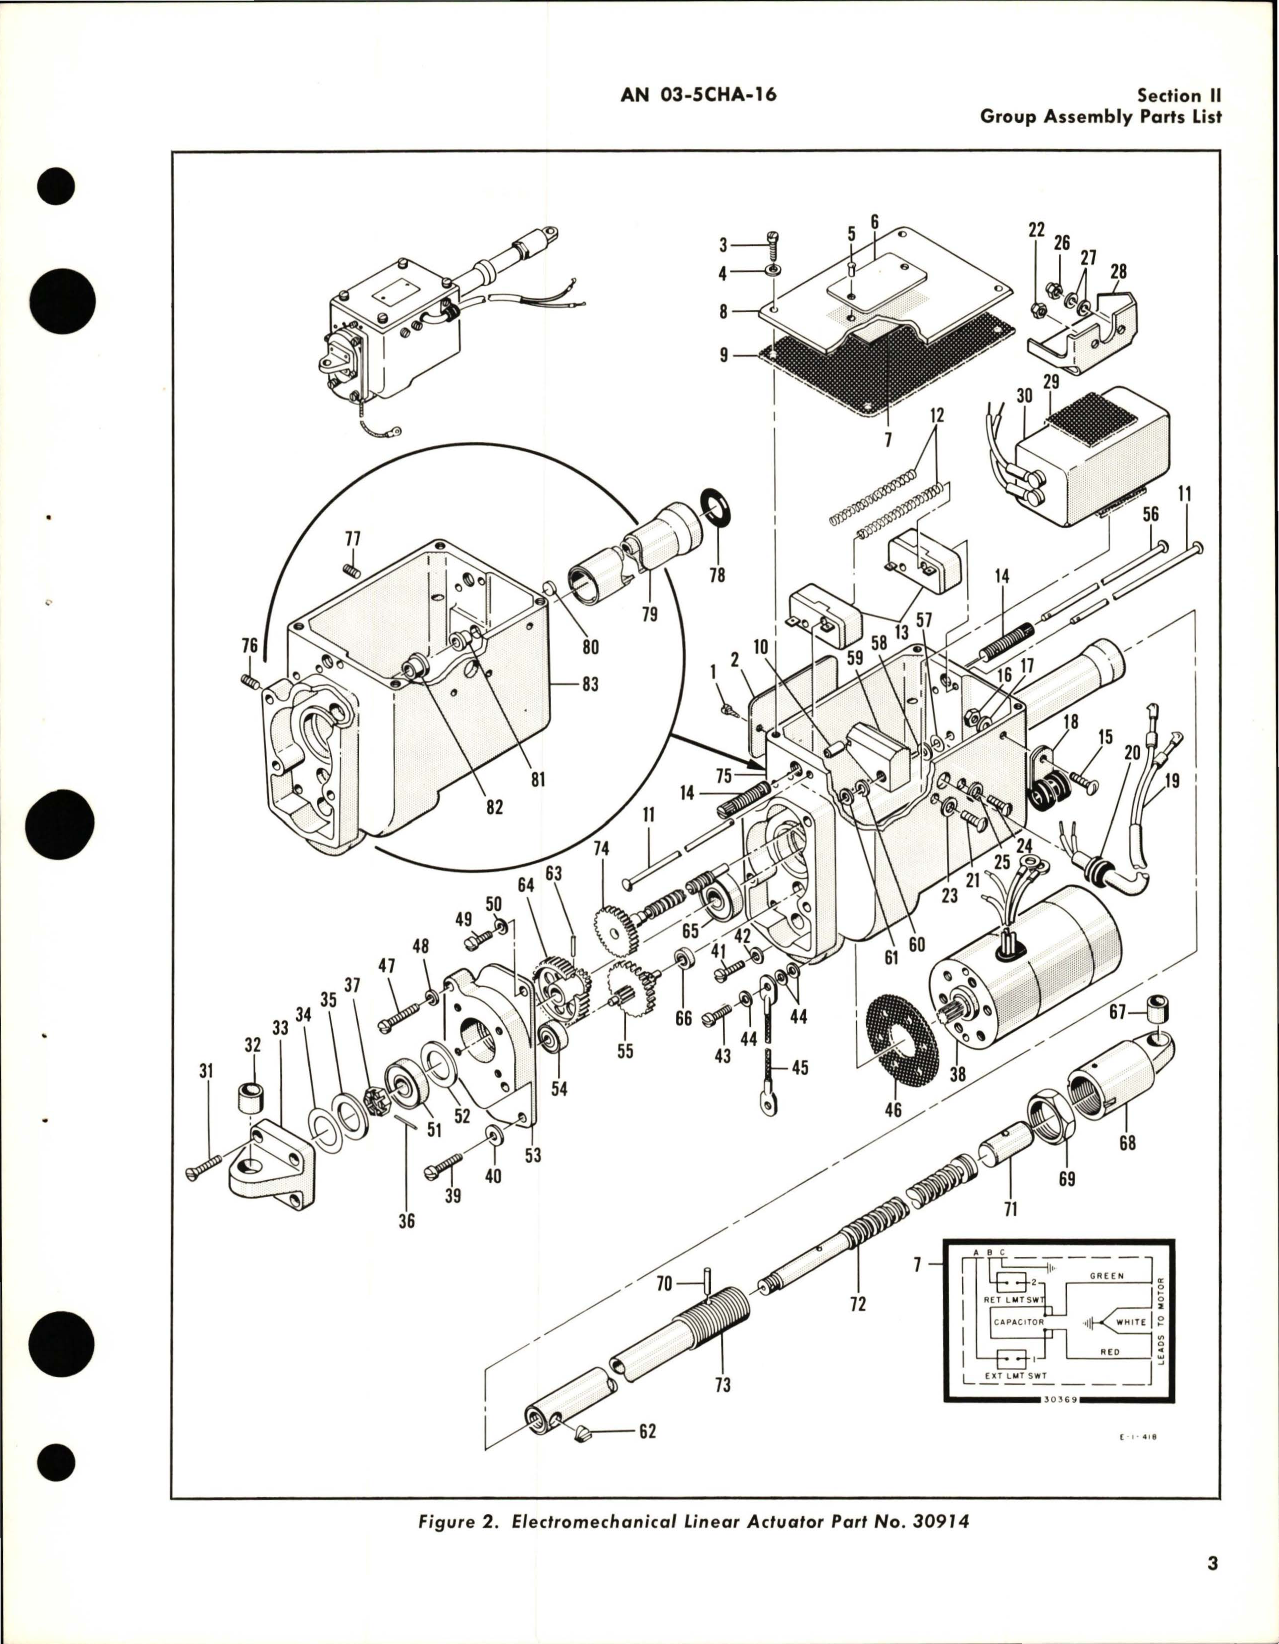 Sample page 7 from AirCorps Library document: Illustrated Parts Breakdown for Electromechanical Linear Actuators 